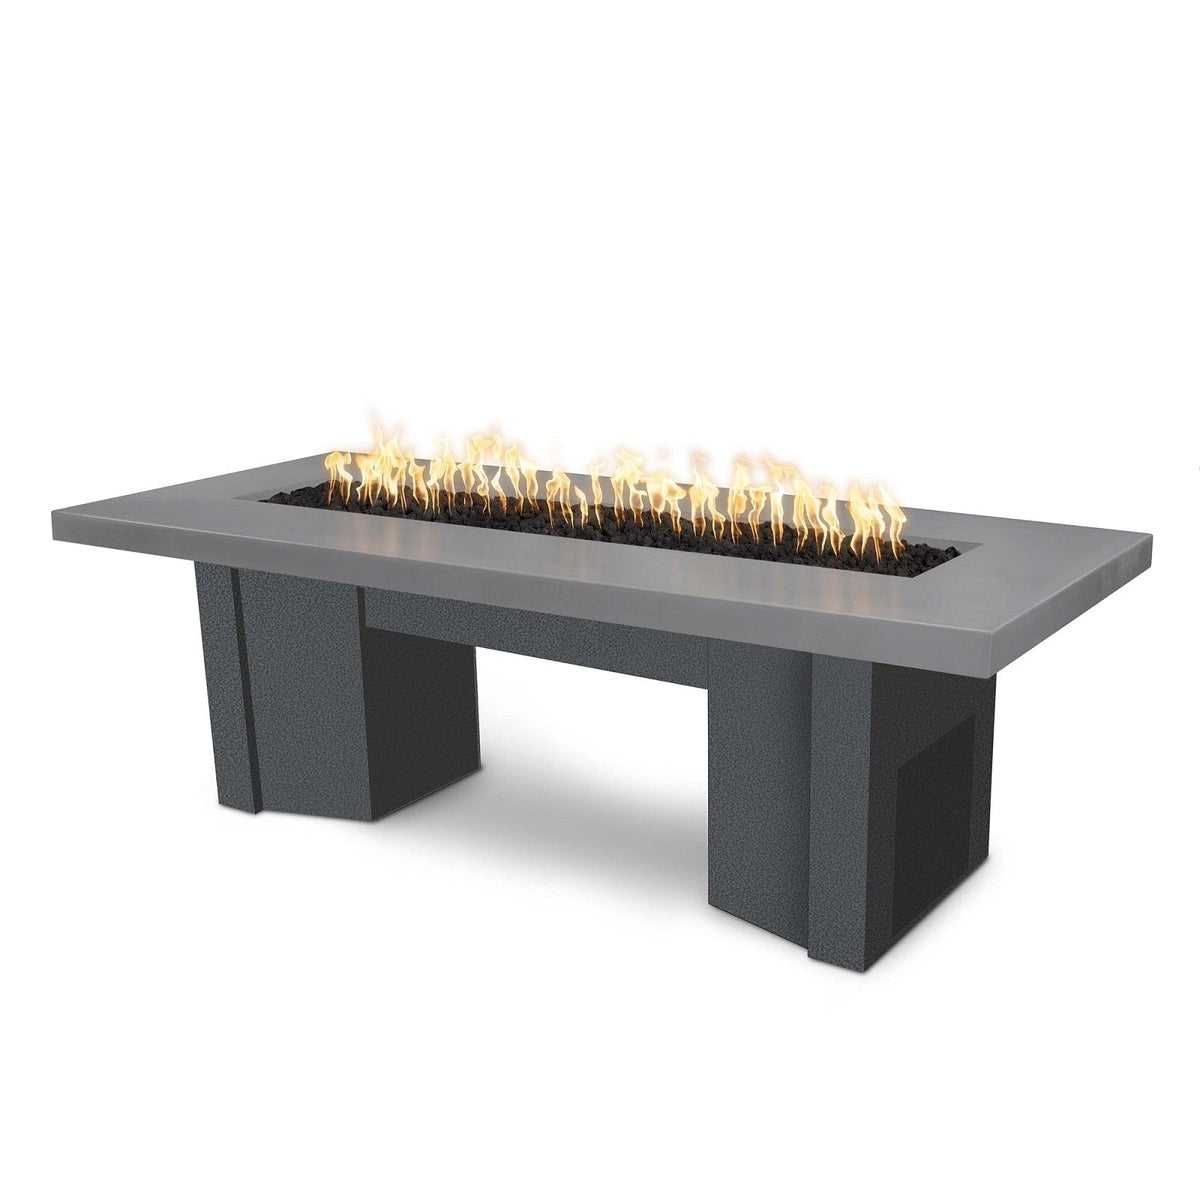 The Outdoor Plus Fire Features Natural Gray (-NGY) / Silver Vein Powder Coated Steel (-SLV) The Outdoor Plus 78&quot; Alameda Fire Table Smooth Concrete in Natural Gas - Match Lit with Flame Sense System / OPT-ALMGFRC78FSML-NG